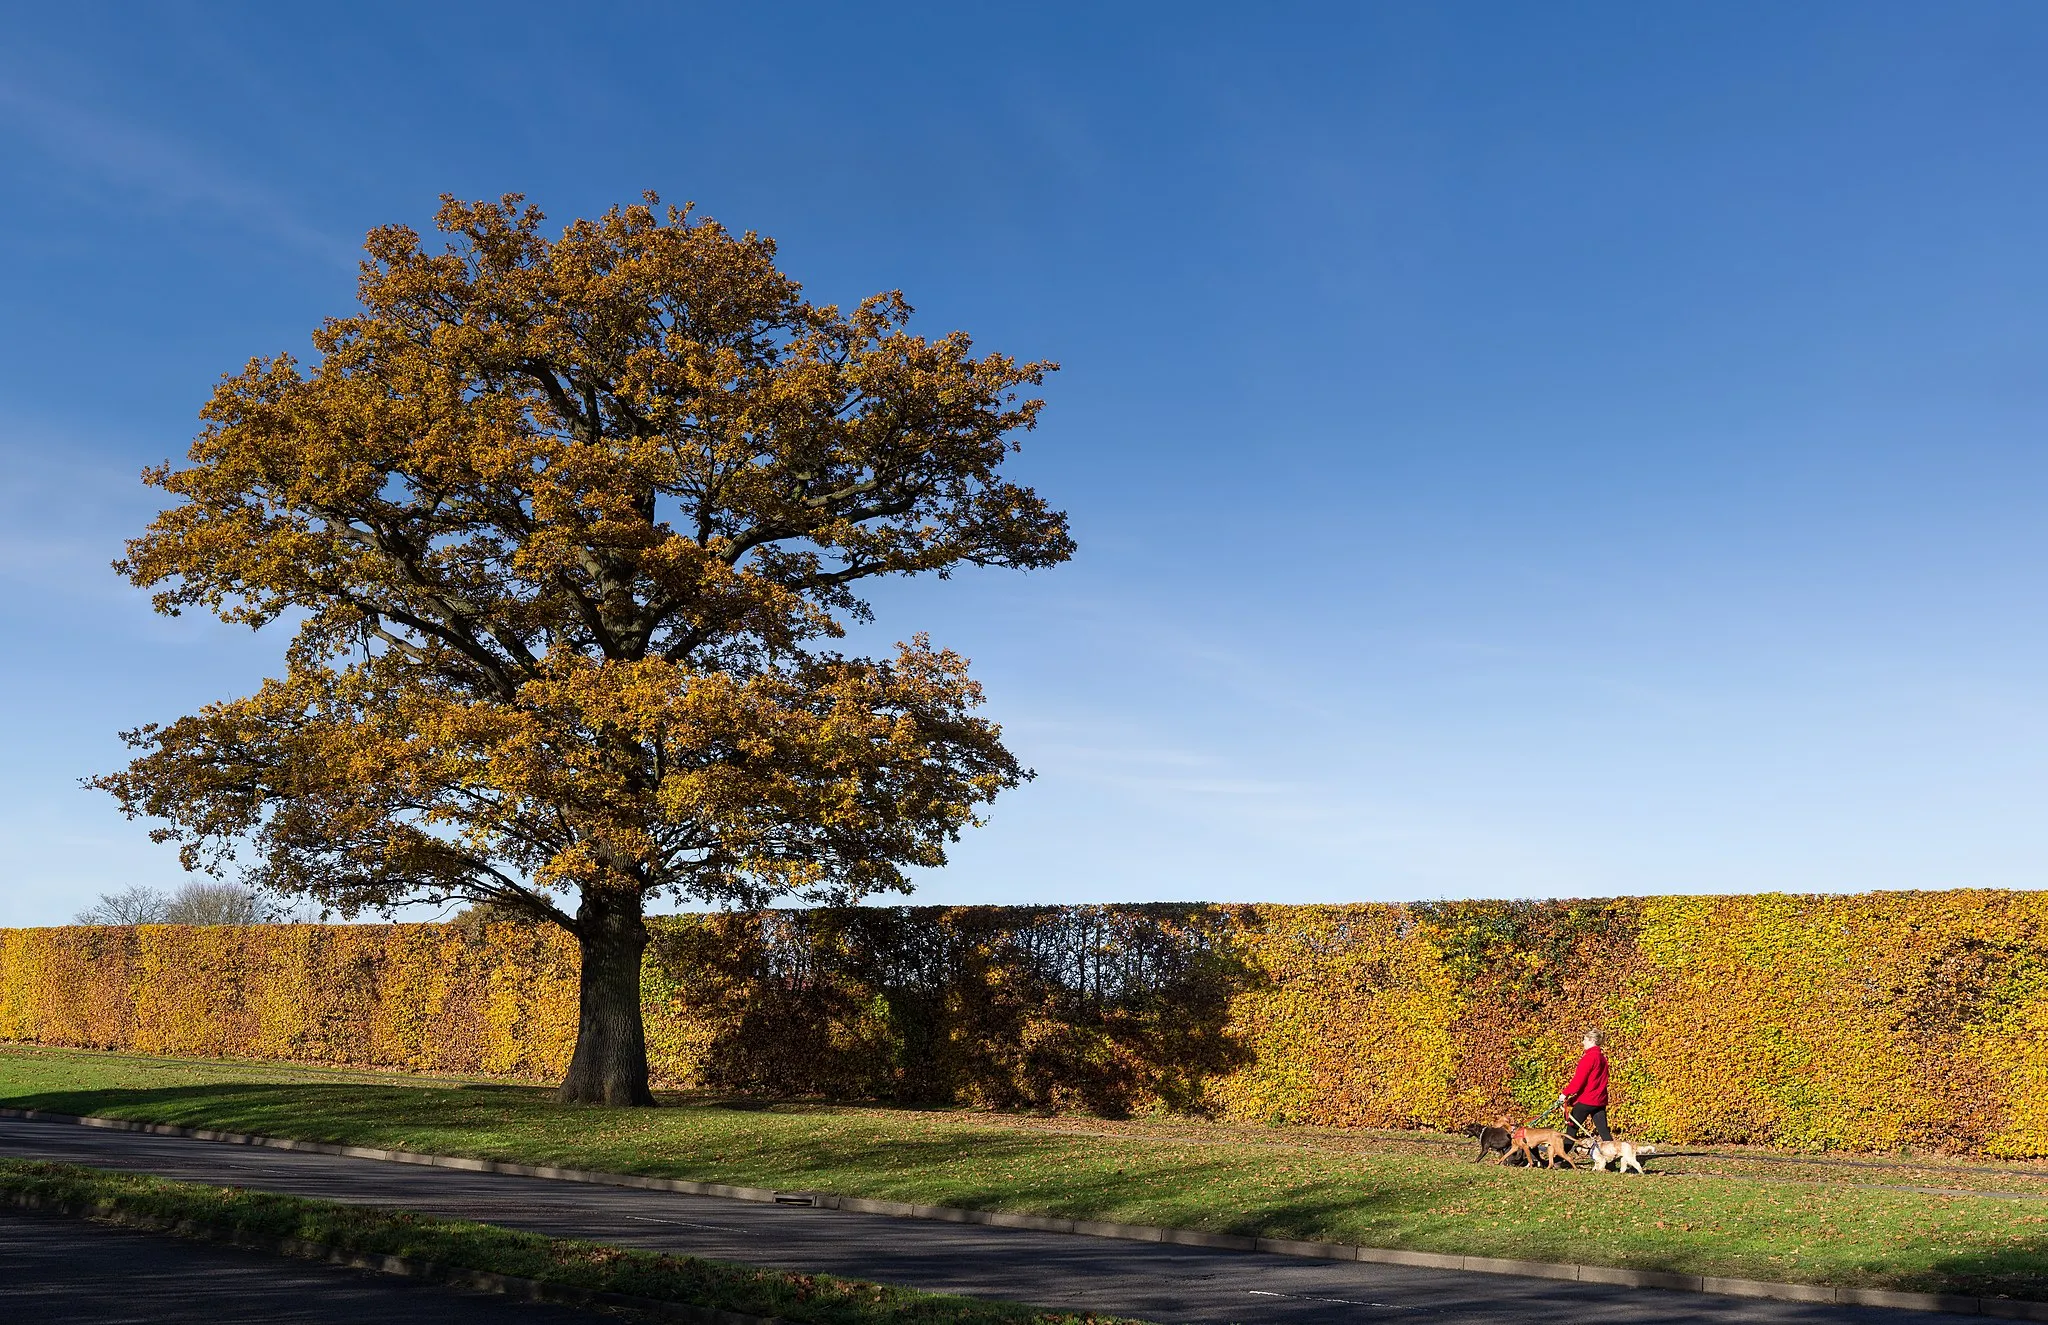 Photo showing: An oak tree and tall hedge show autumn colours. Broadhall Way in Stevenage is a dual carriageway road with cycle path alongside. A young lady is walking with four dogs. The image was taken with a 50mm lens; f8; 1/200 s; ISO 100 and is composed of 24 landscape shots in four rows stitched together using Hugin and blended with Smartblend and Photoshop.